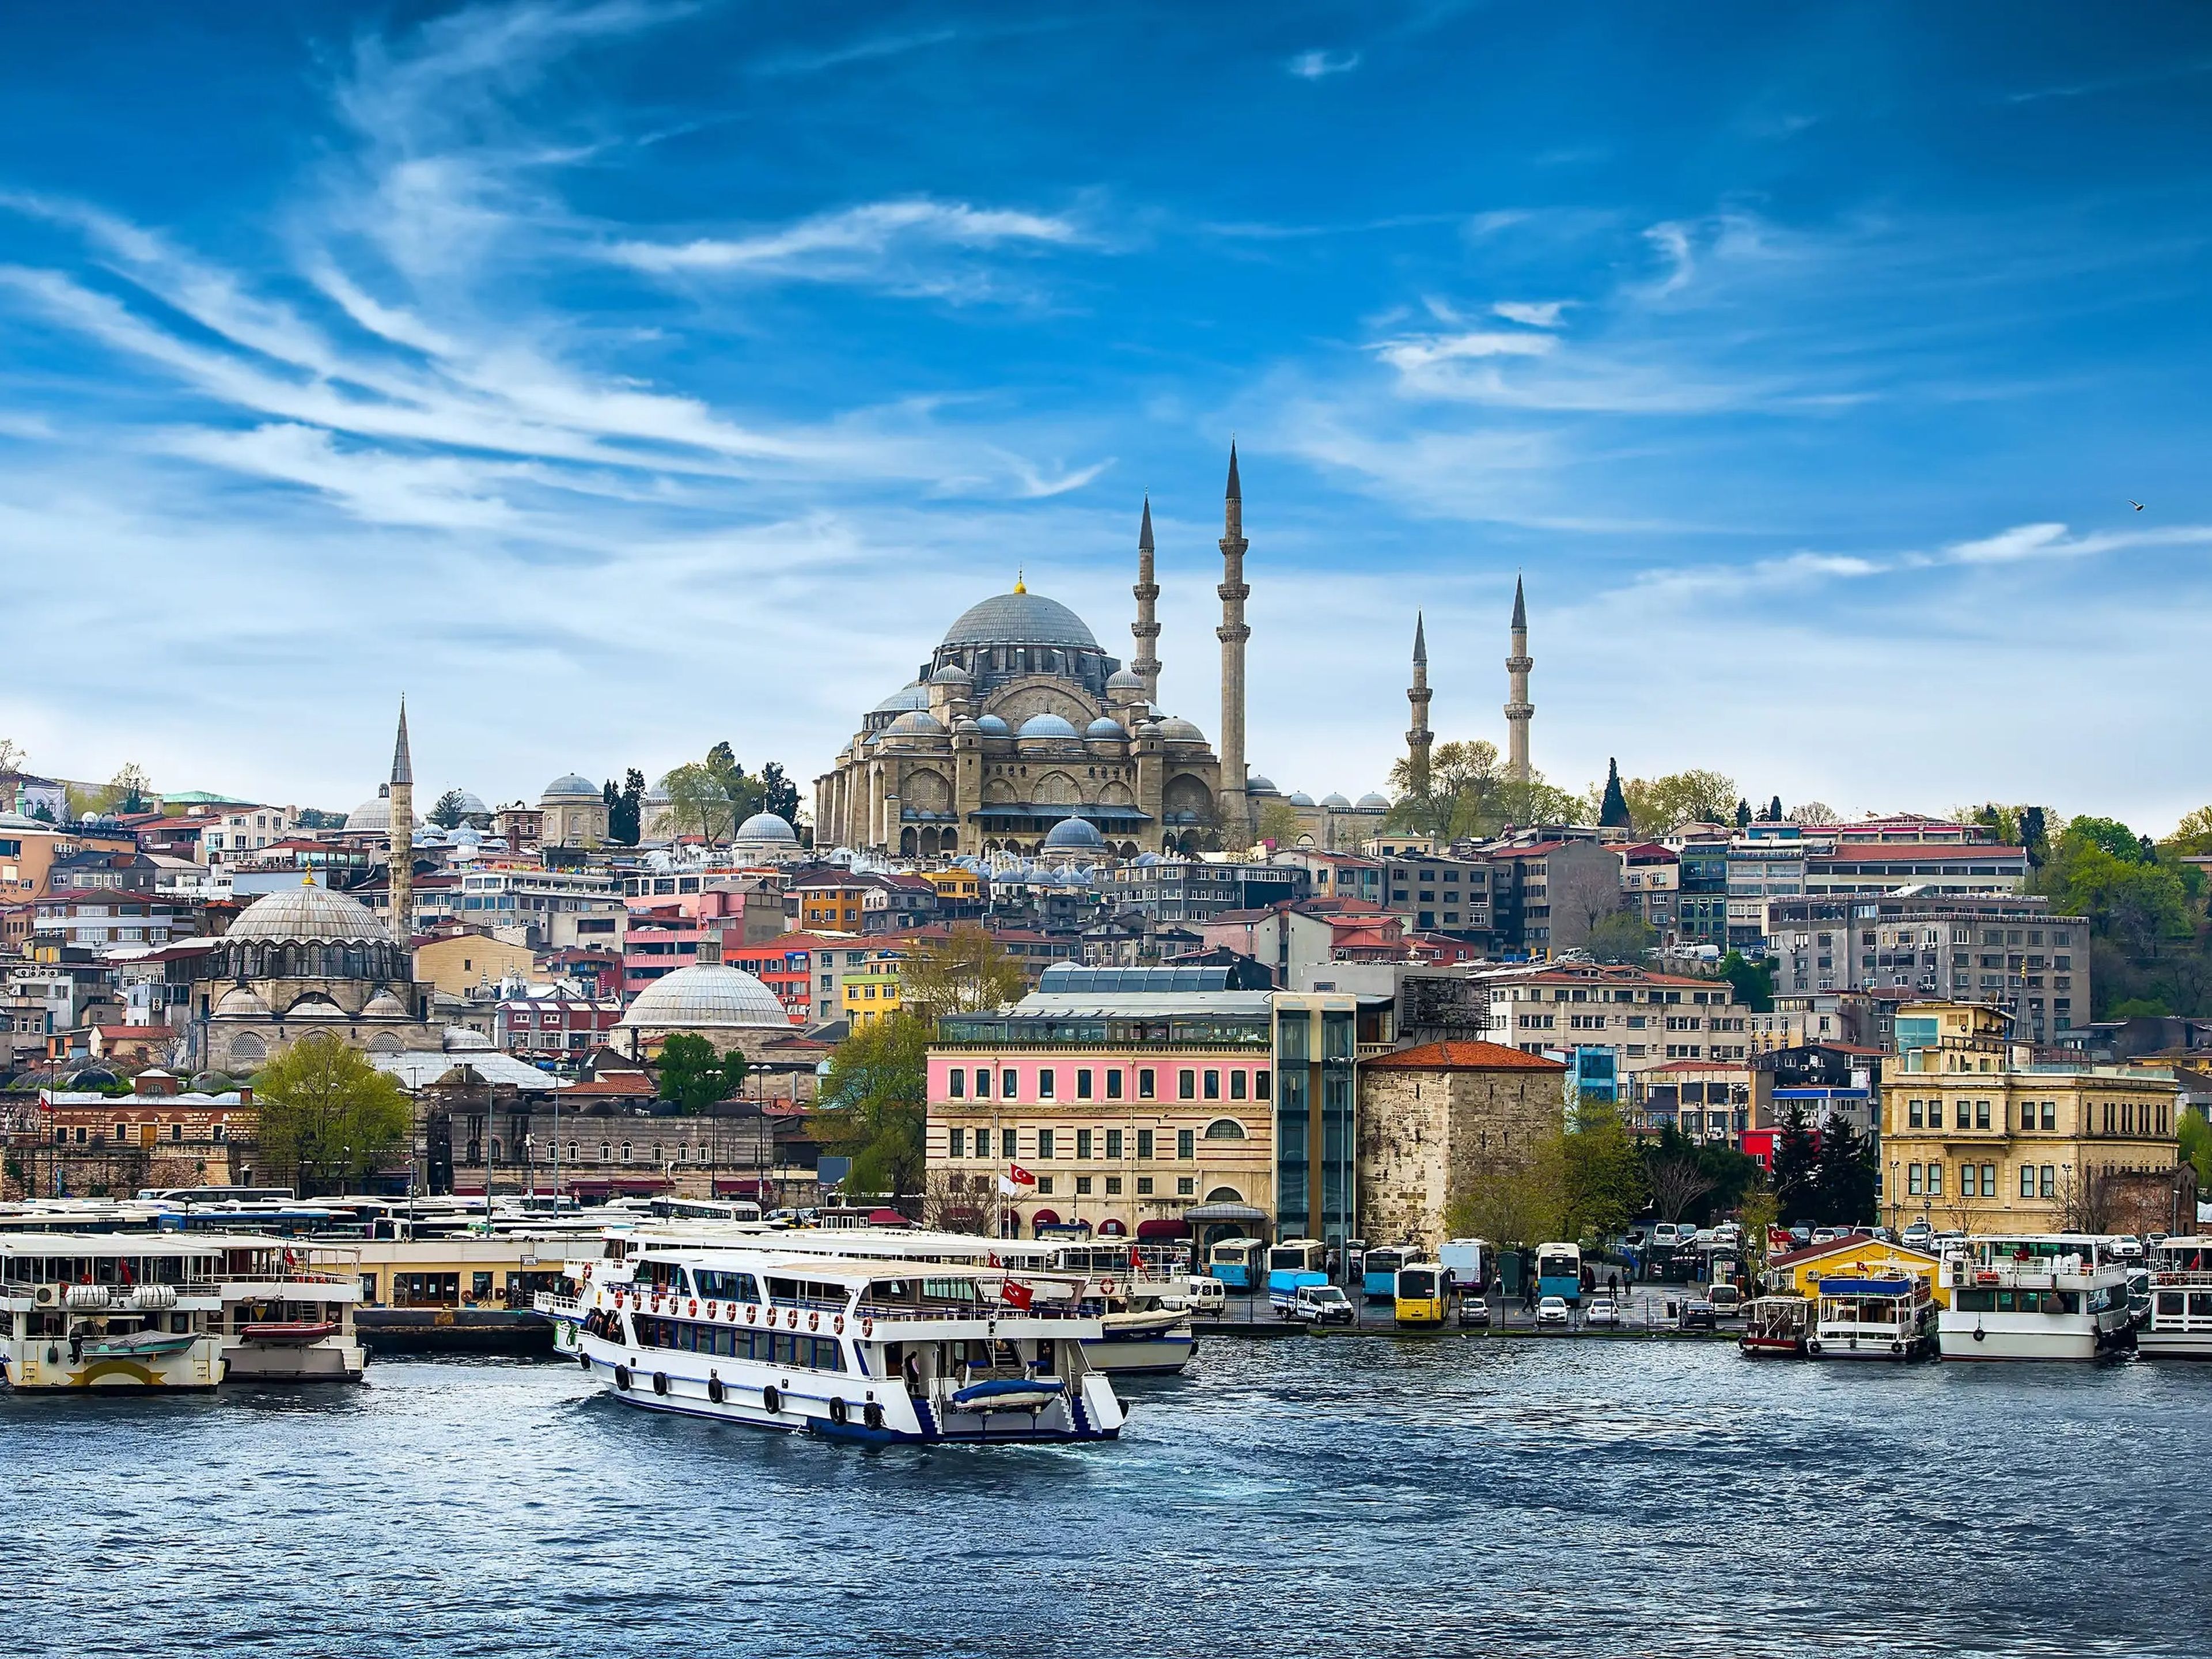 A view of the city skyline and waterfront with boats in Istanbul, Turkey